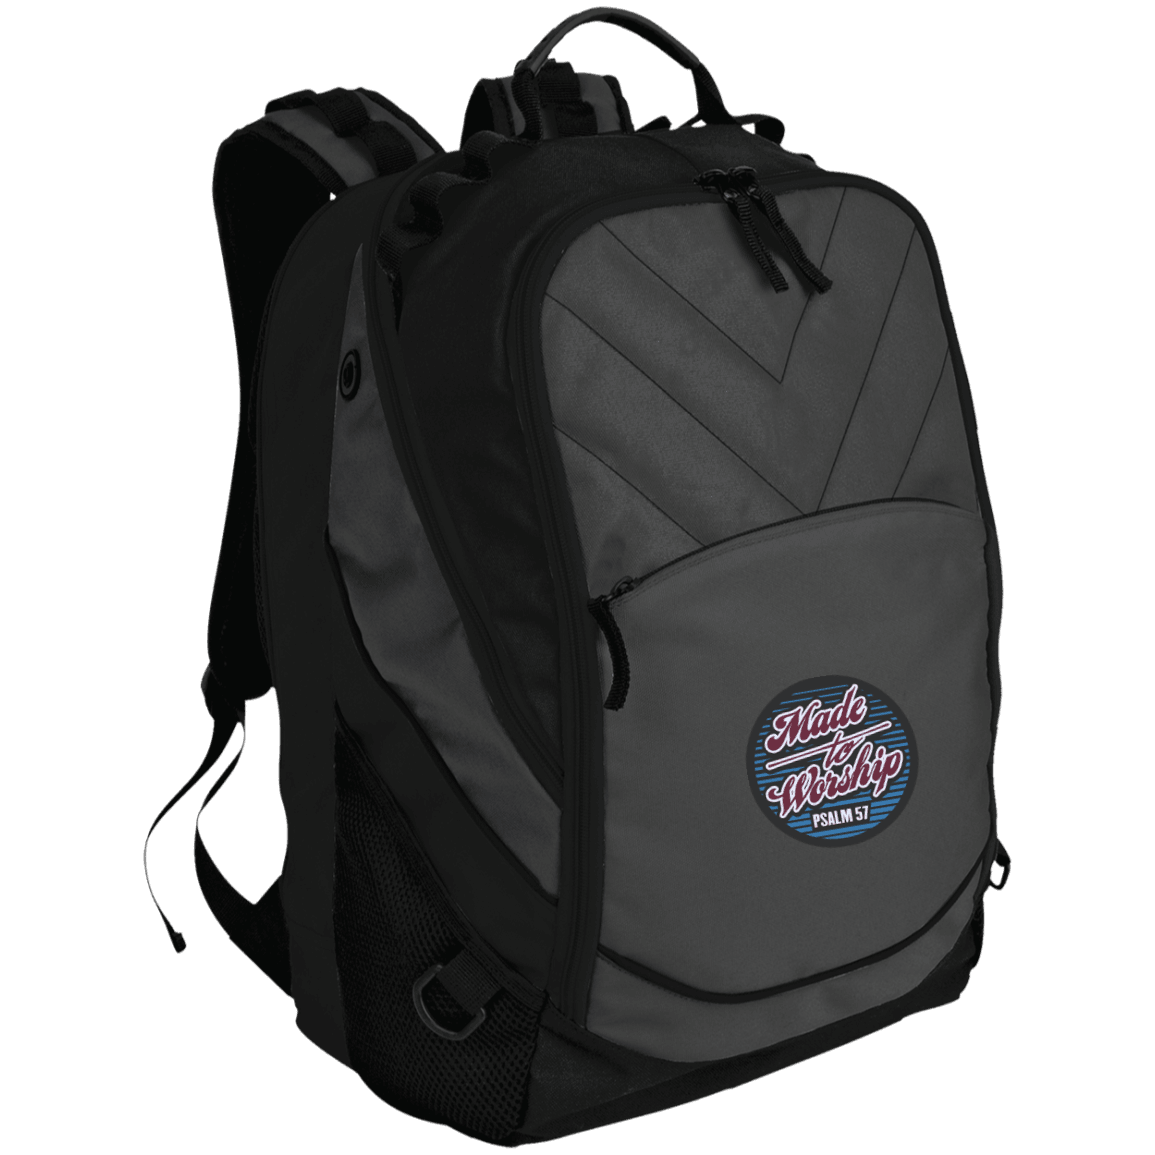 Designs by MyUtopia Shout Out:Made To Worship Psalm 57 Embroidered Laptop Computer Backpack,Dark Charcoal/Black / One Size,Backpacks